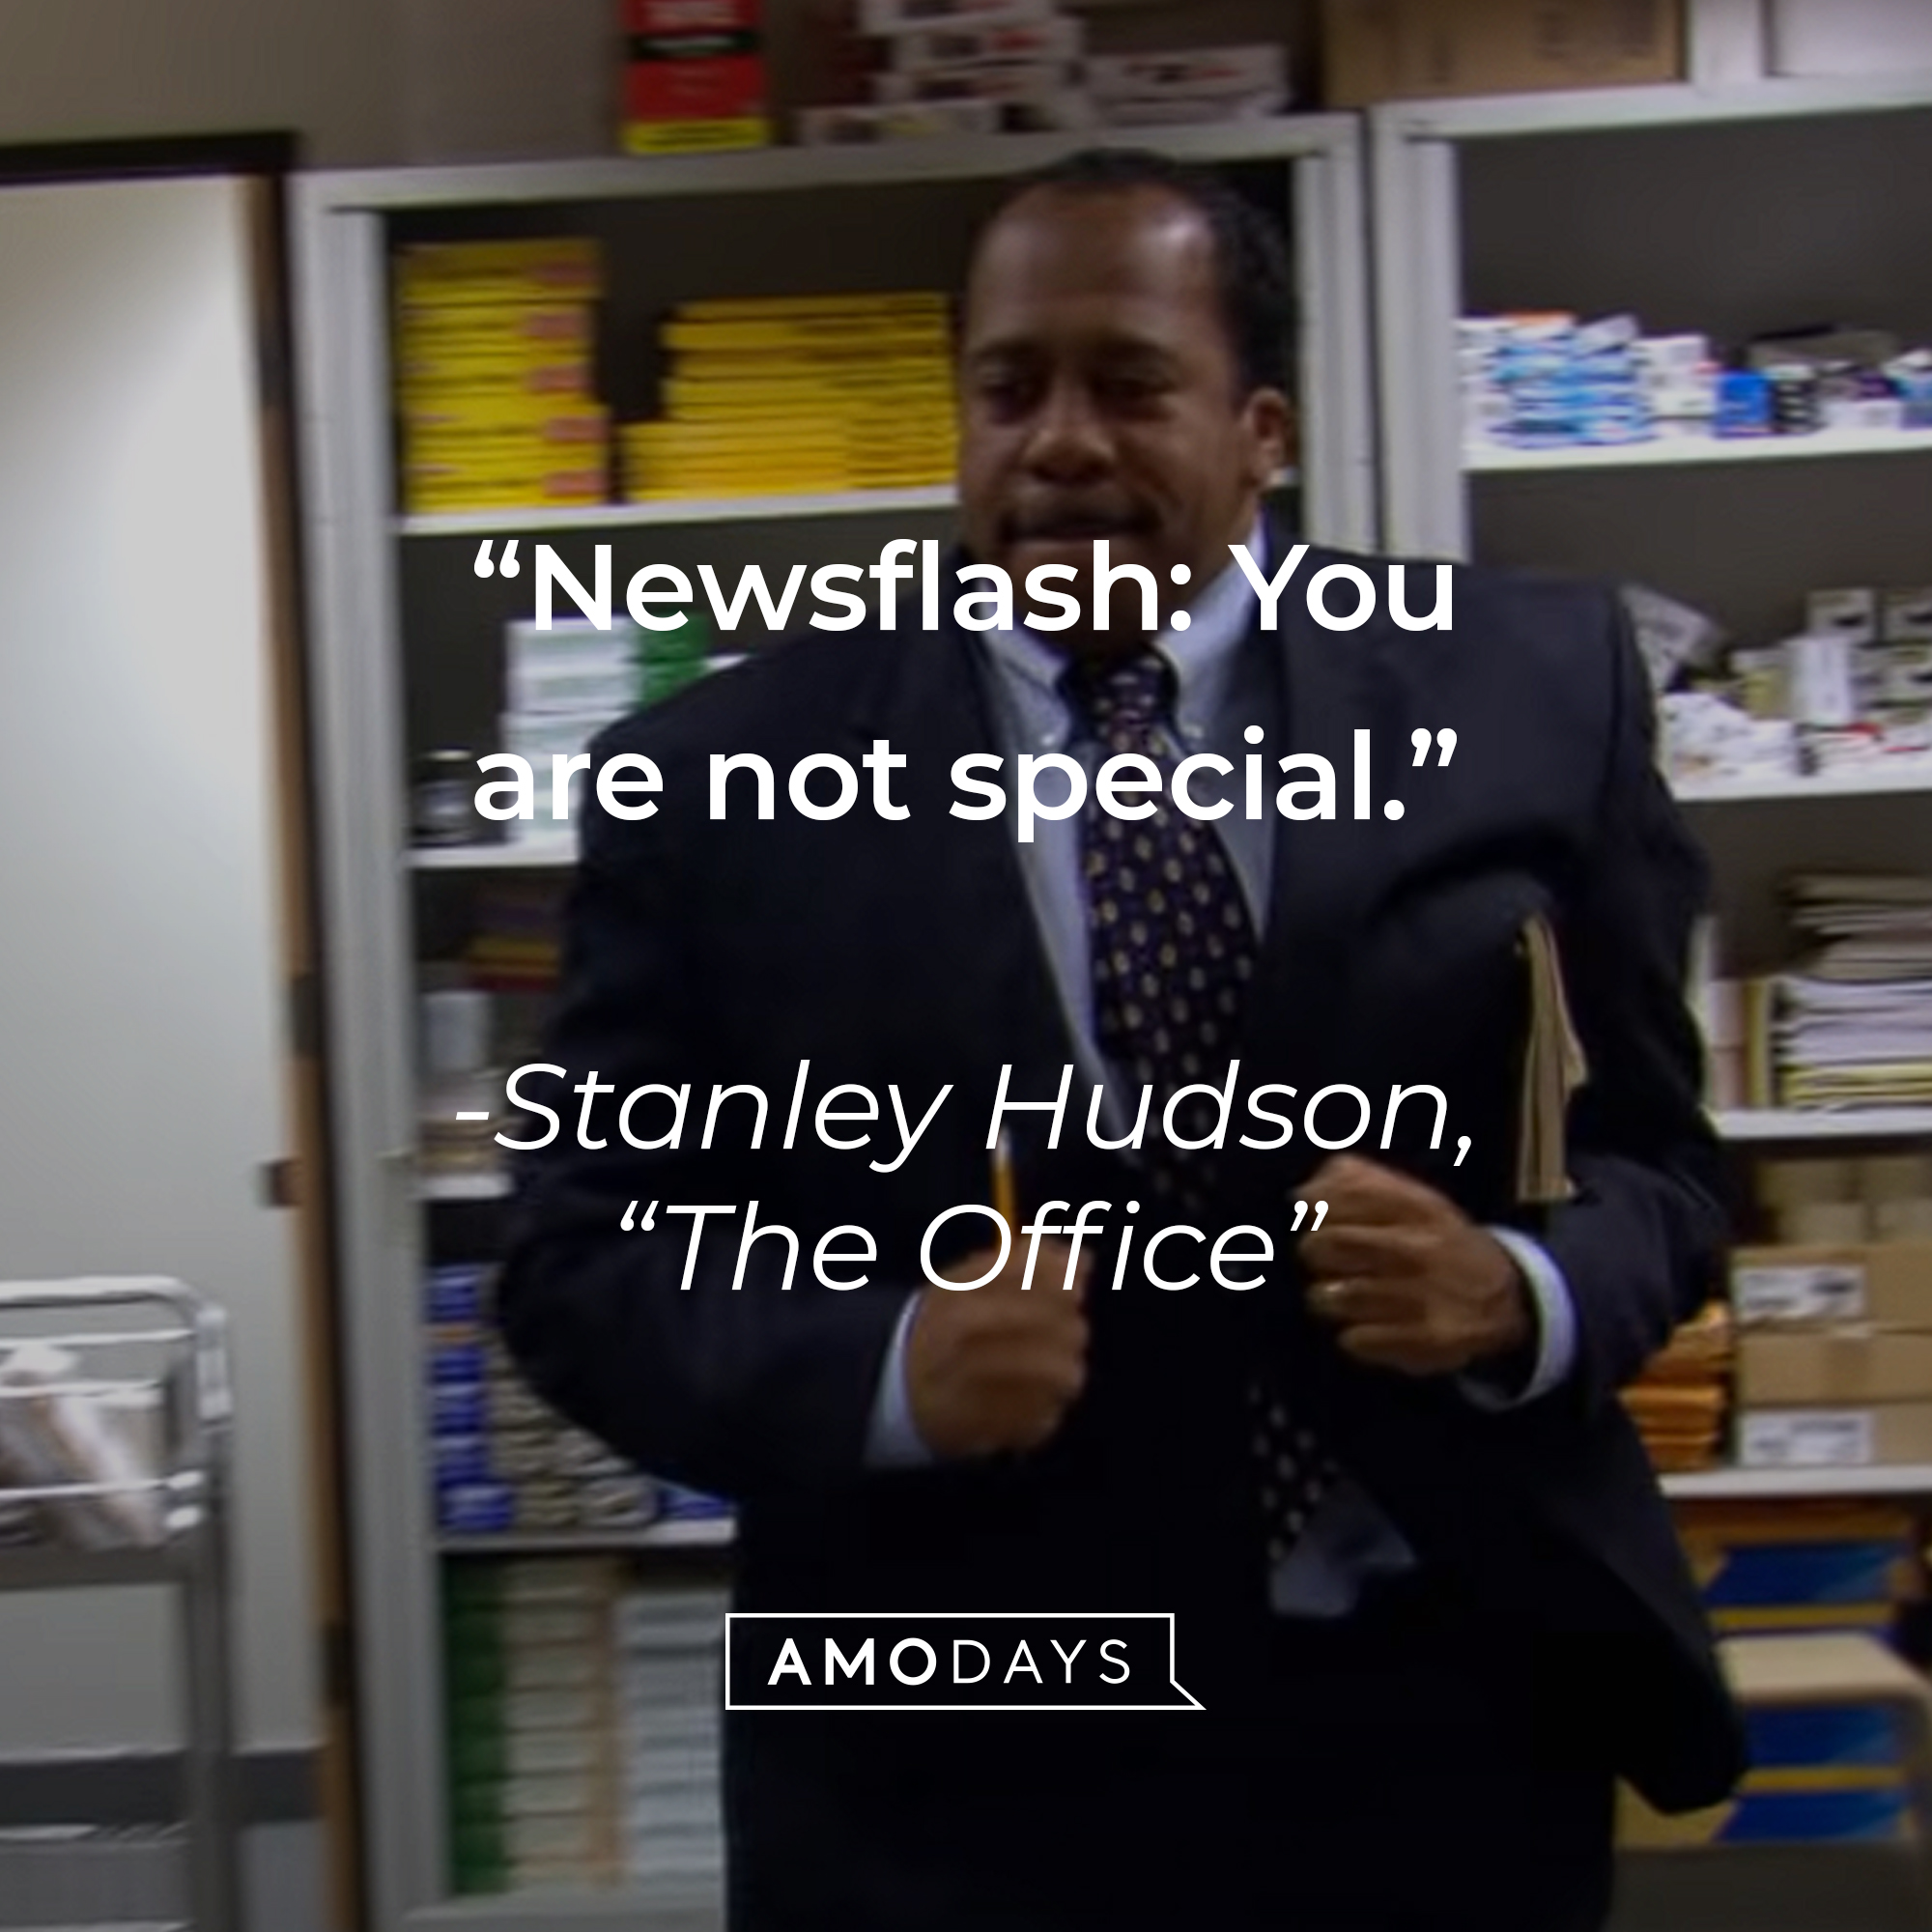 An image of Leslie David Baker as Stanley Hudson in "The Office" with the quote: “Newsflash: You are not special.” | Source: youtube.com/The Office